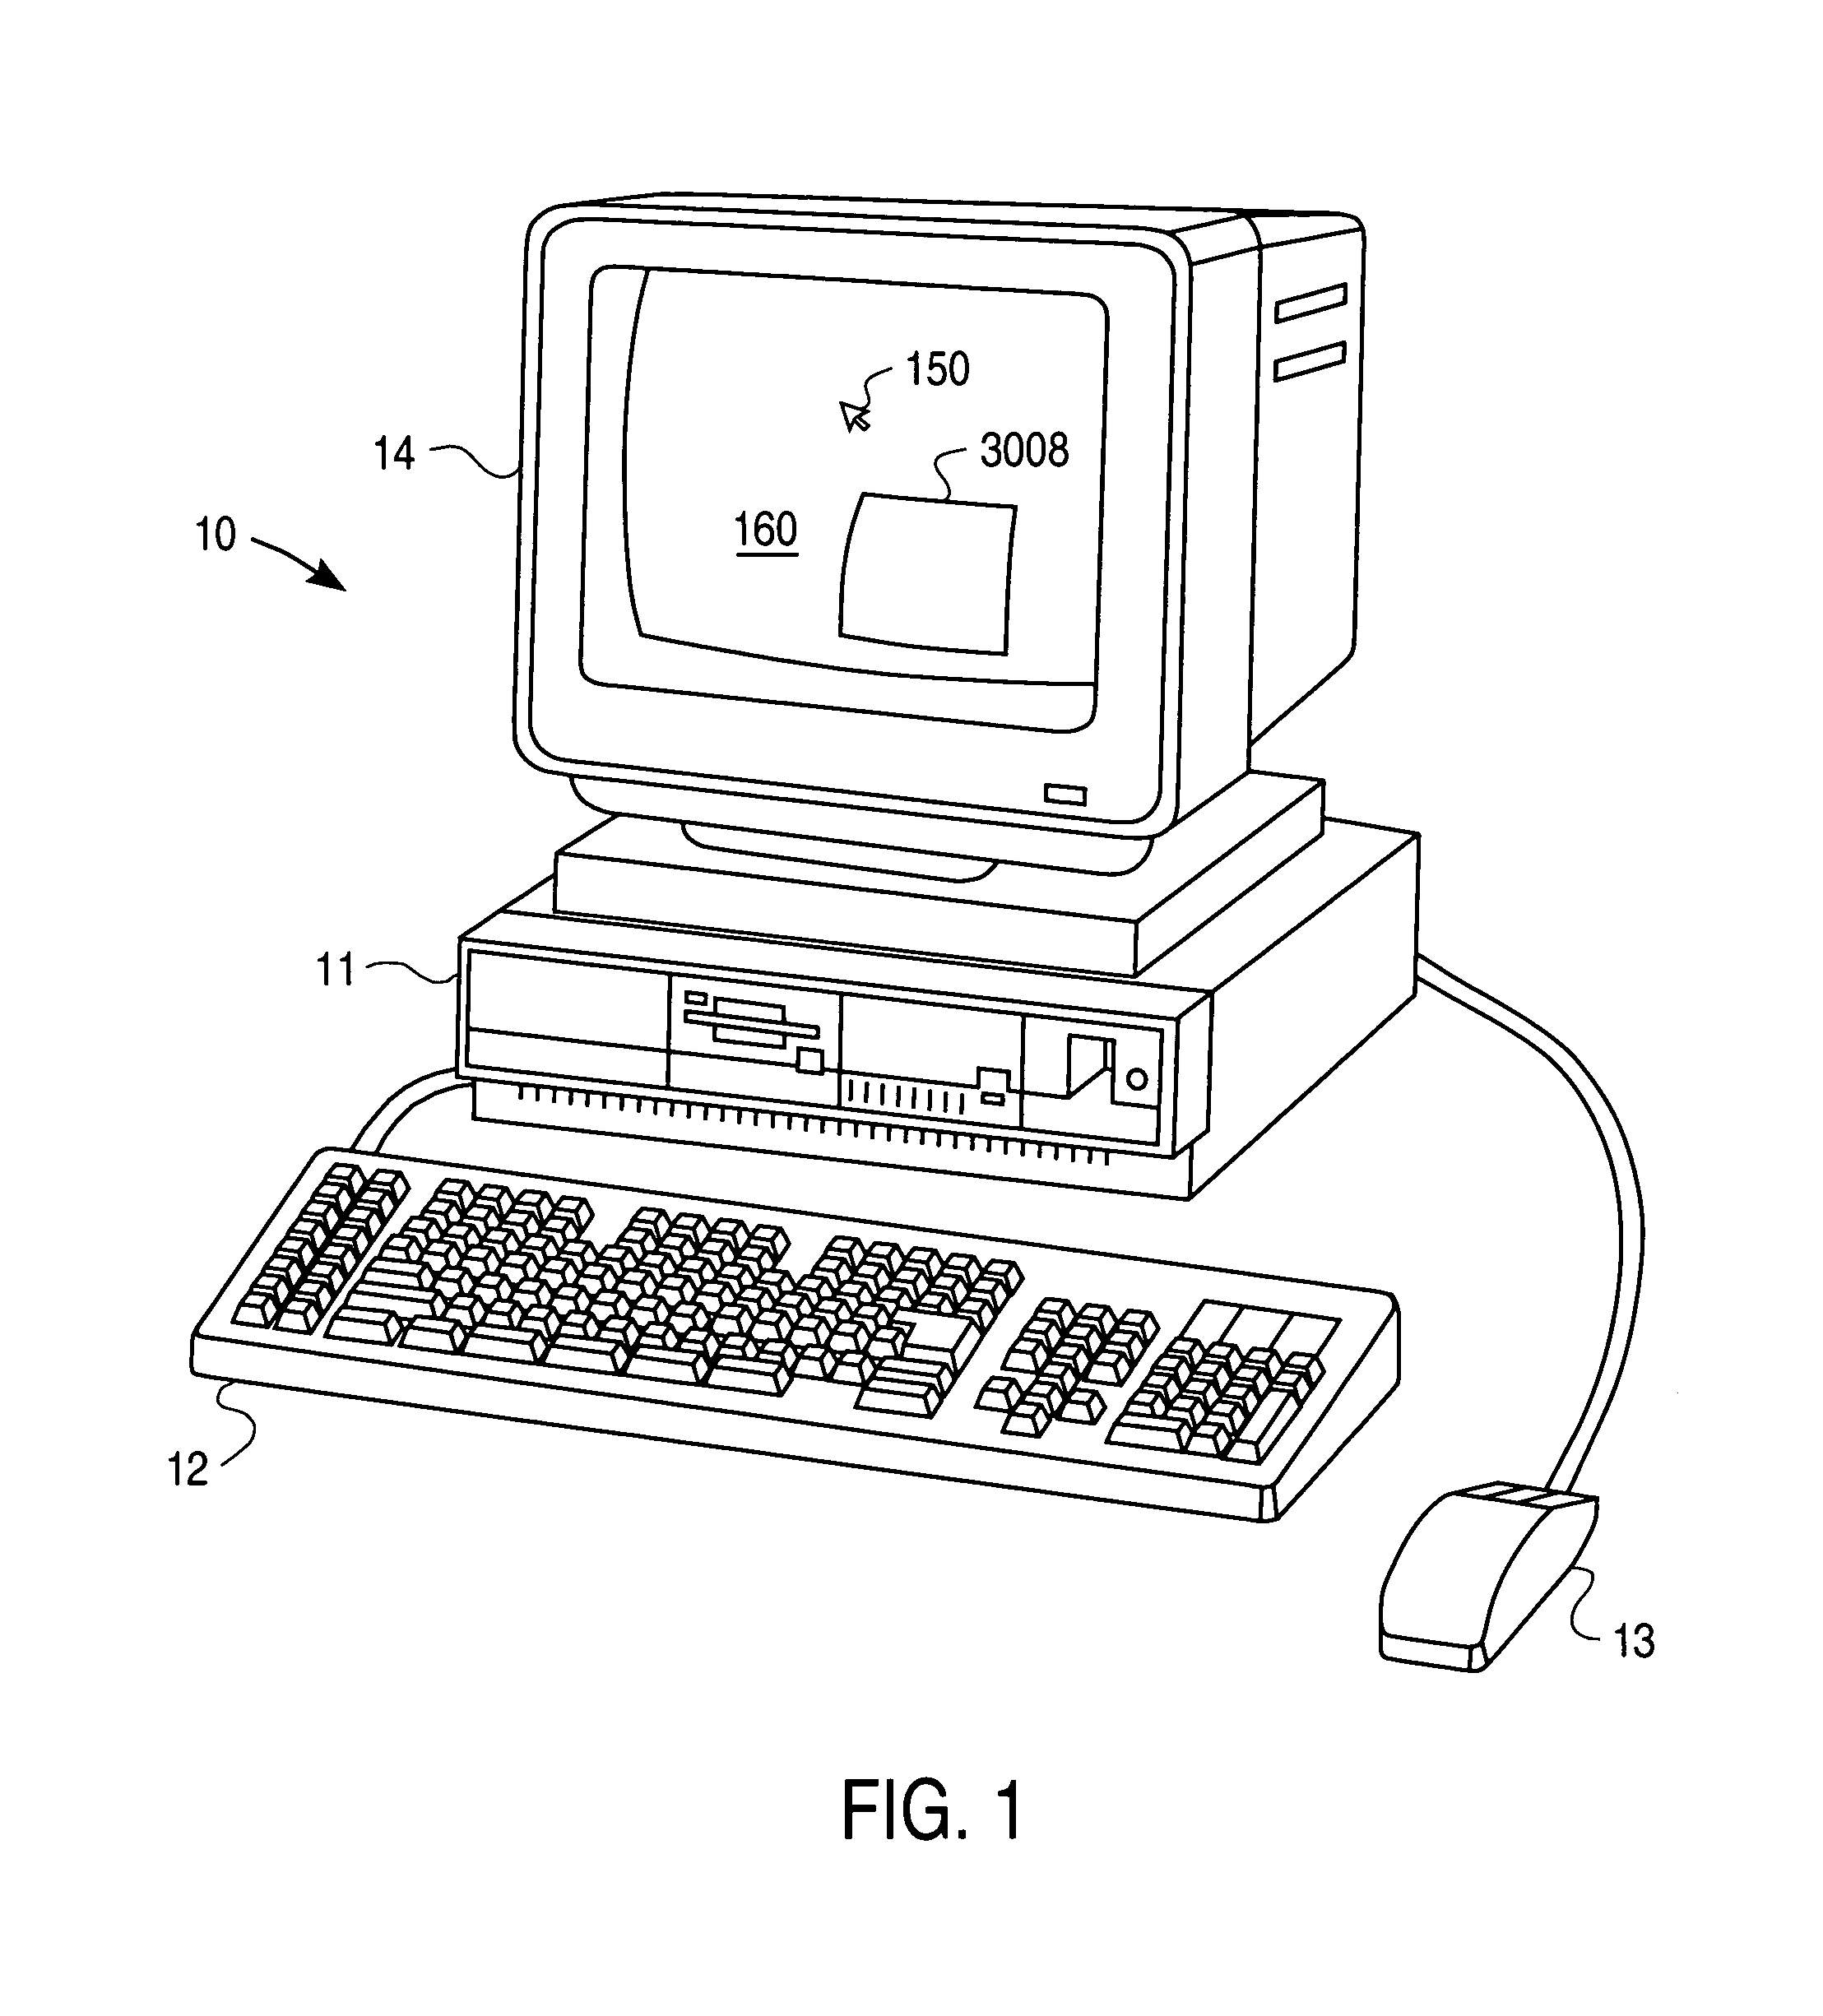 Apparatus and method for TOL client boundary protection